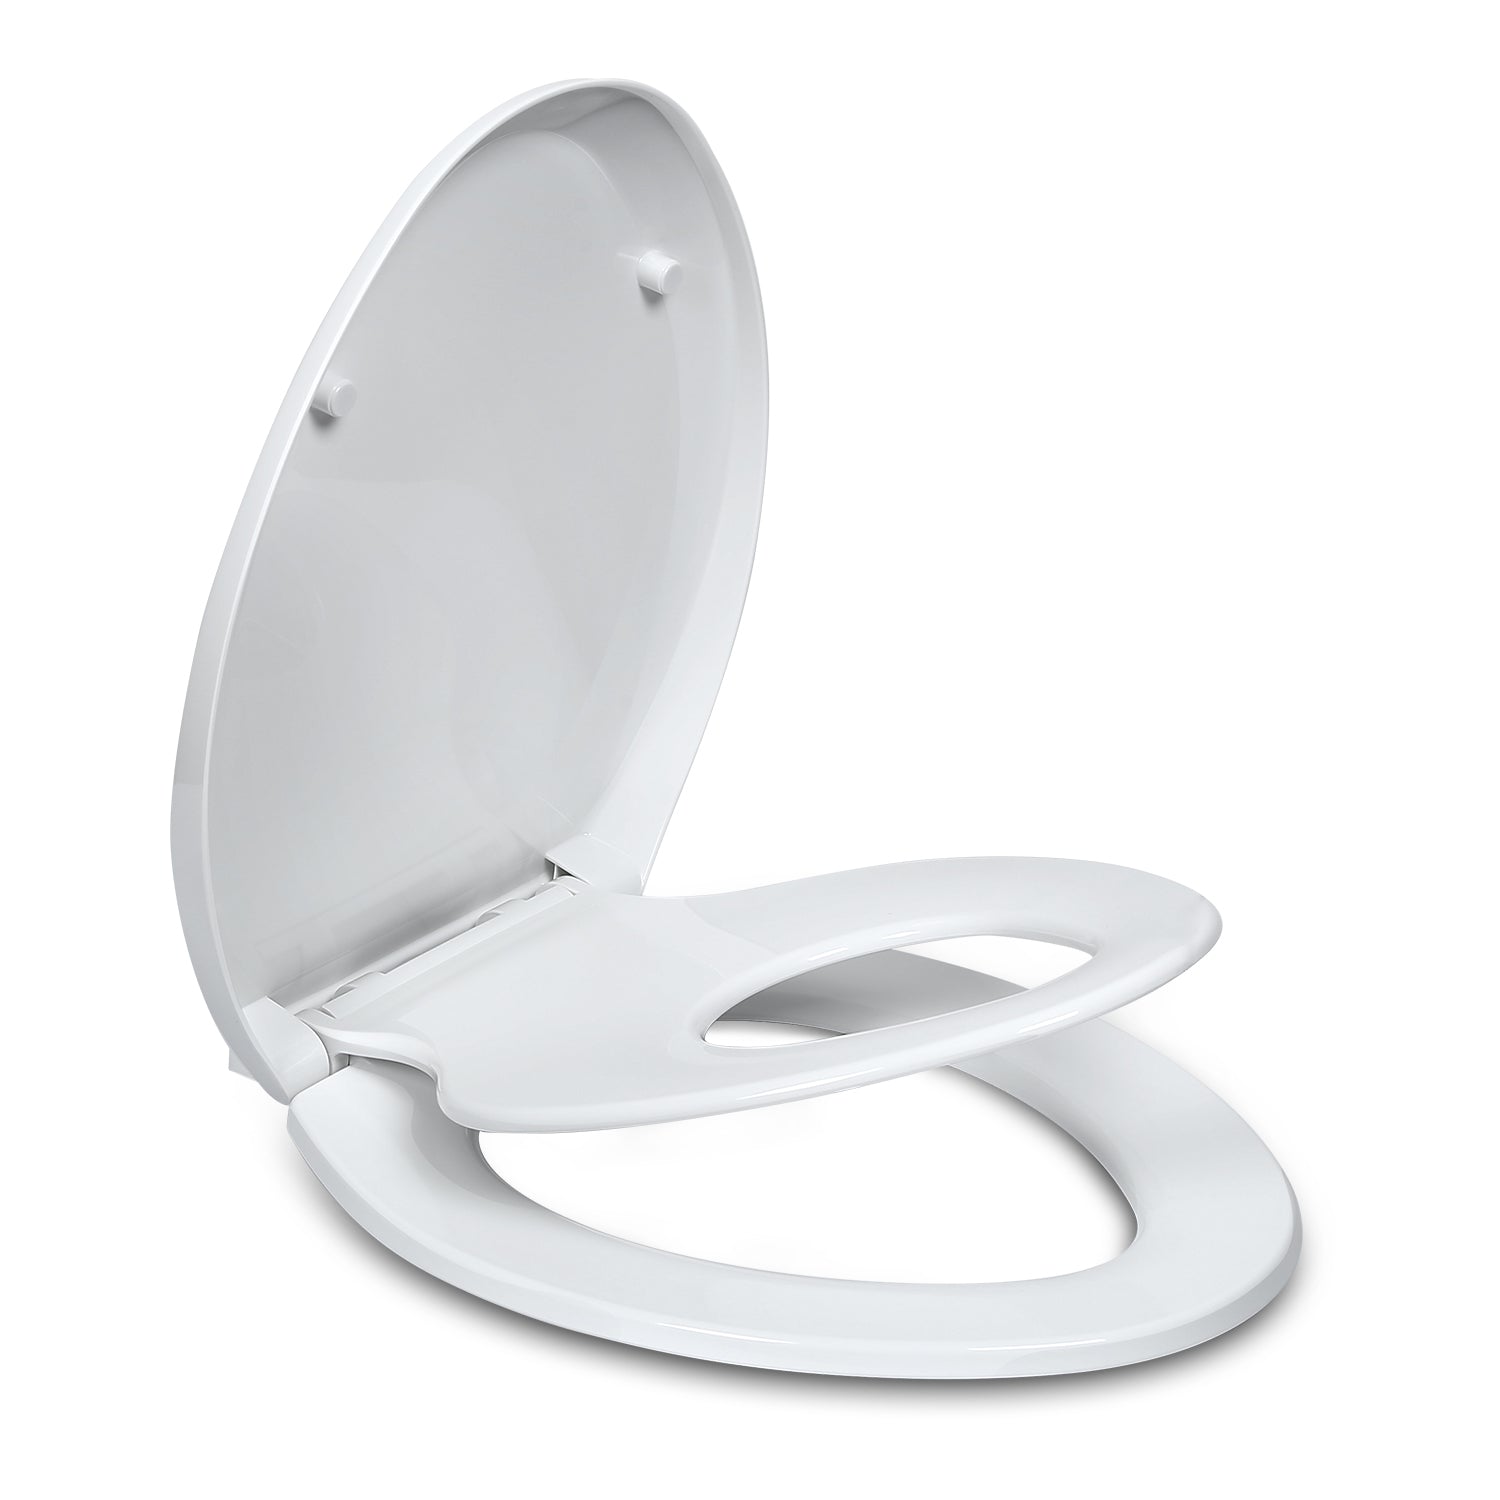 Elongated Toilet Seats with Built in Potty Training Seat, Magnetic Kids Seat and Cover, Slow Close, Fits both Adult and Child, Plastic, White